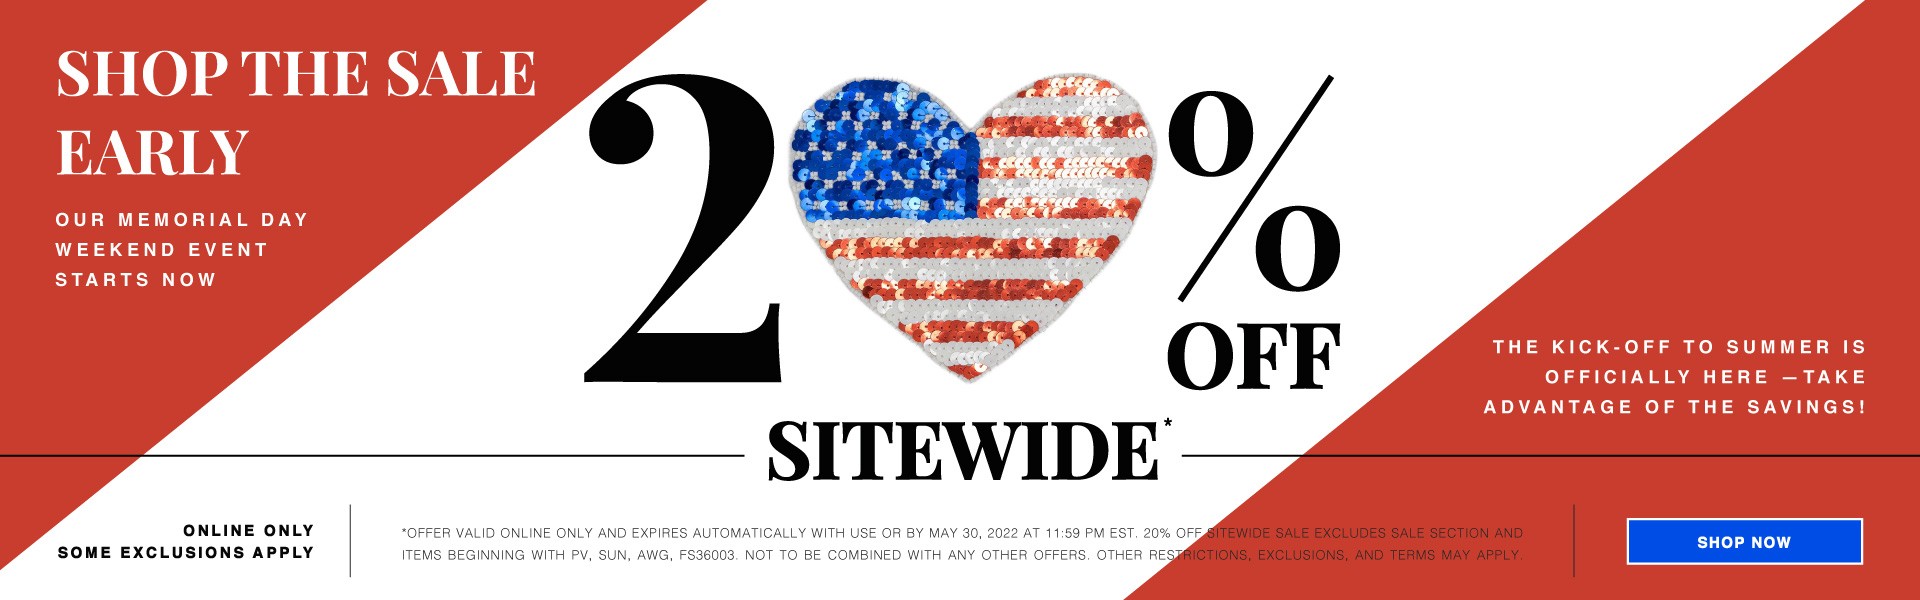 Shop the Memorial Day Sale Early! Take 20% Off Sitewide